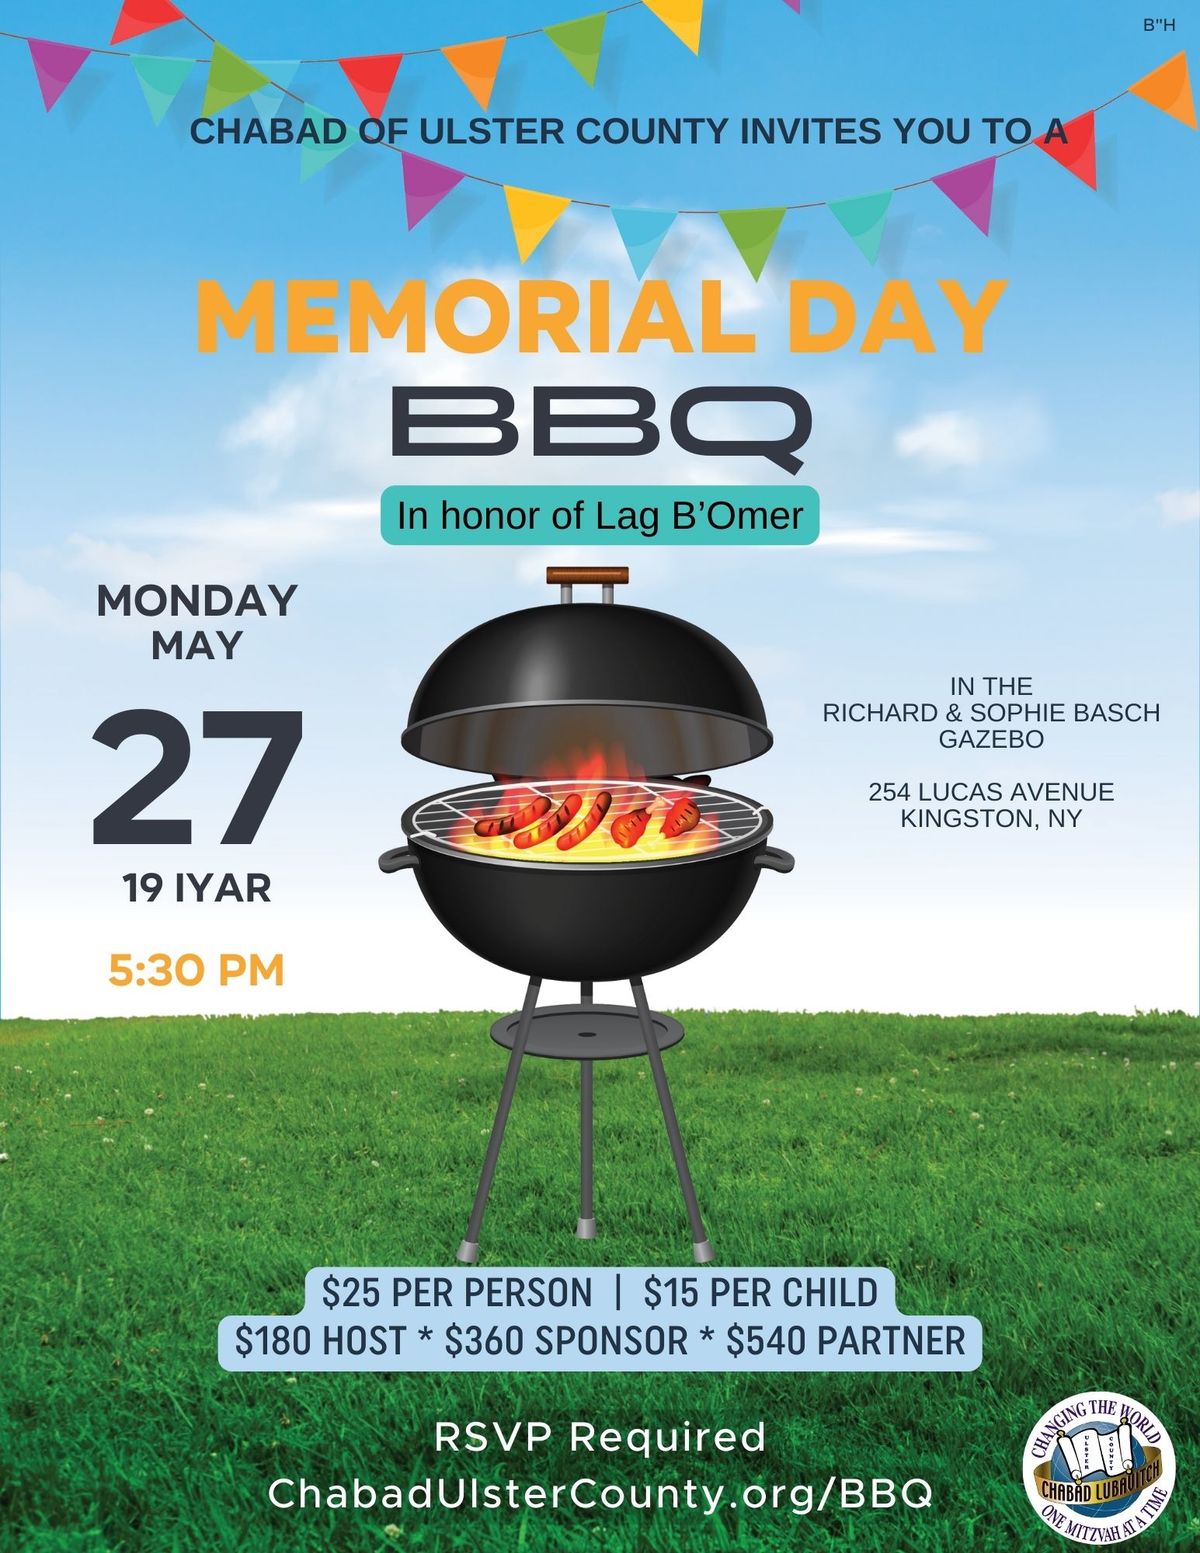 Memorial Day BBQ in honor of Lag B'Omer